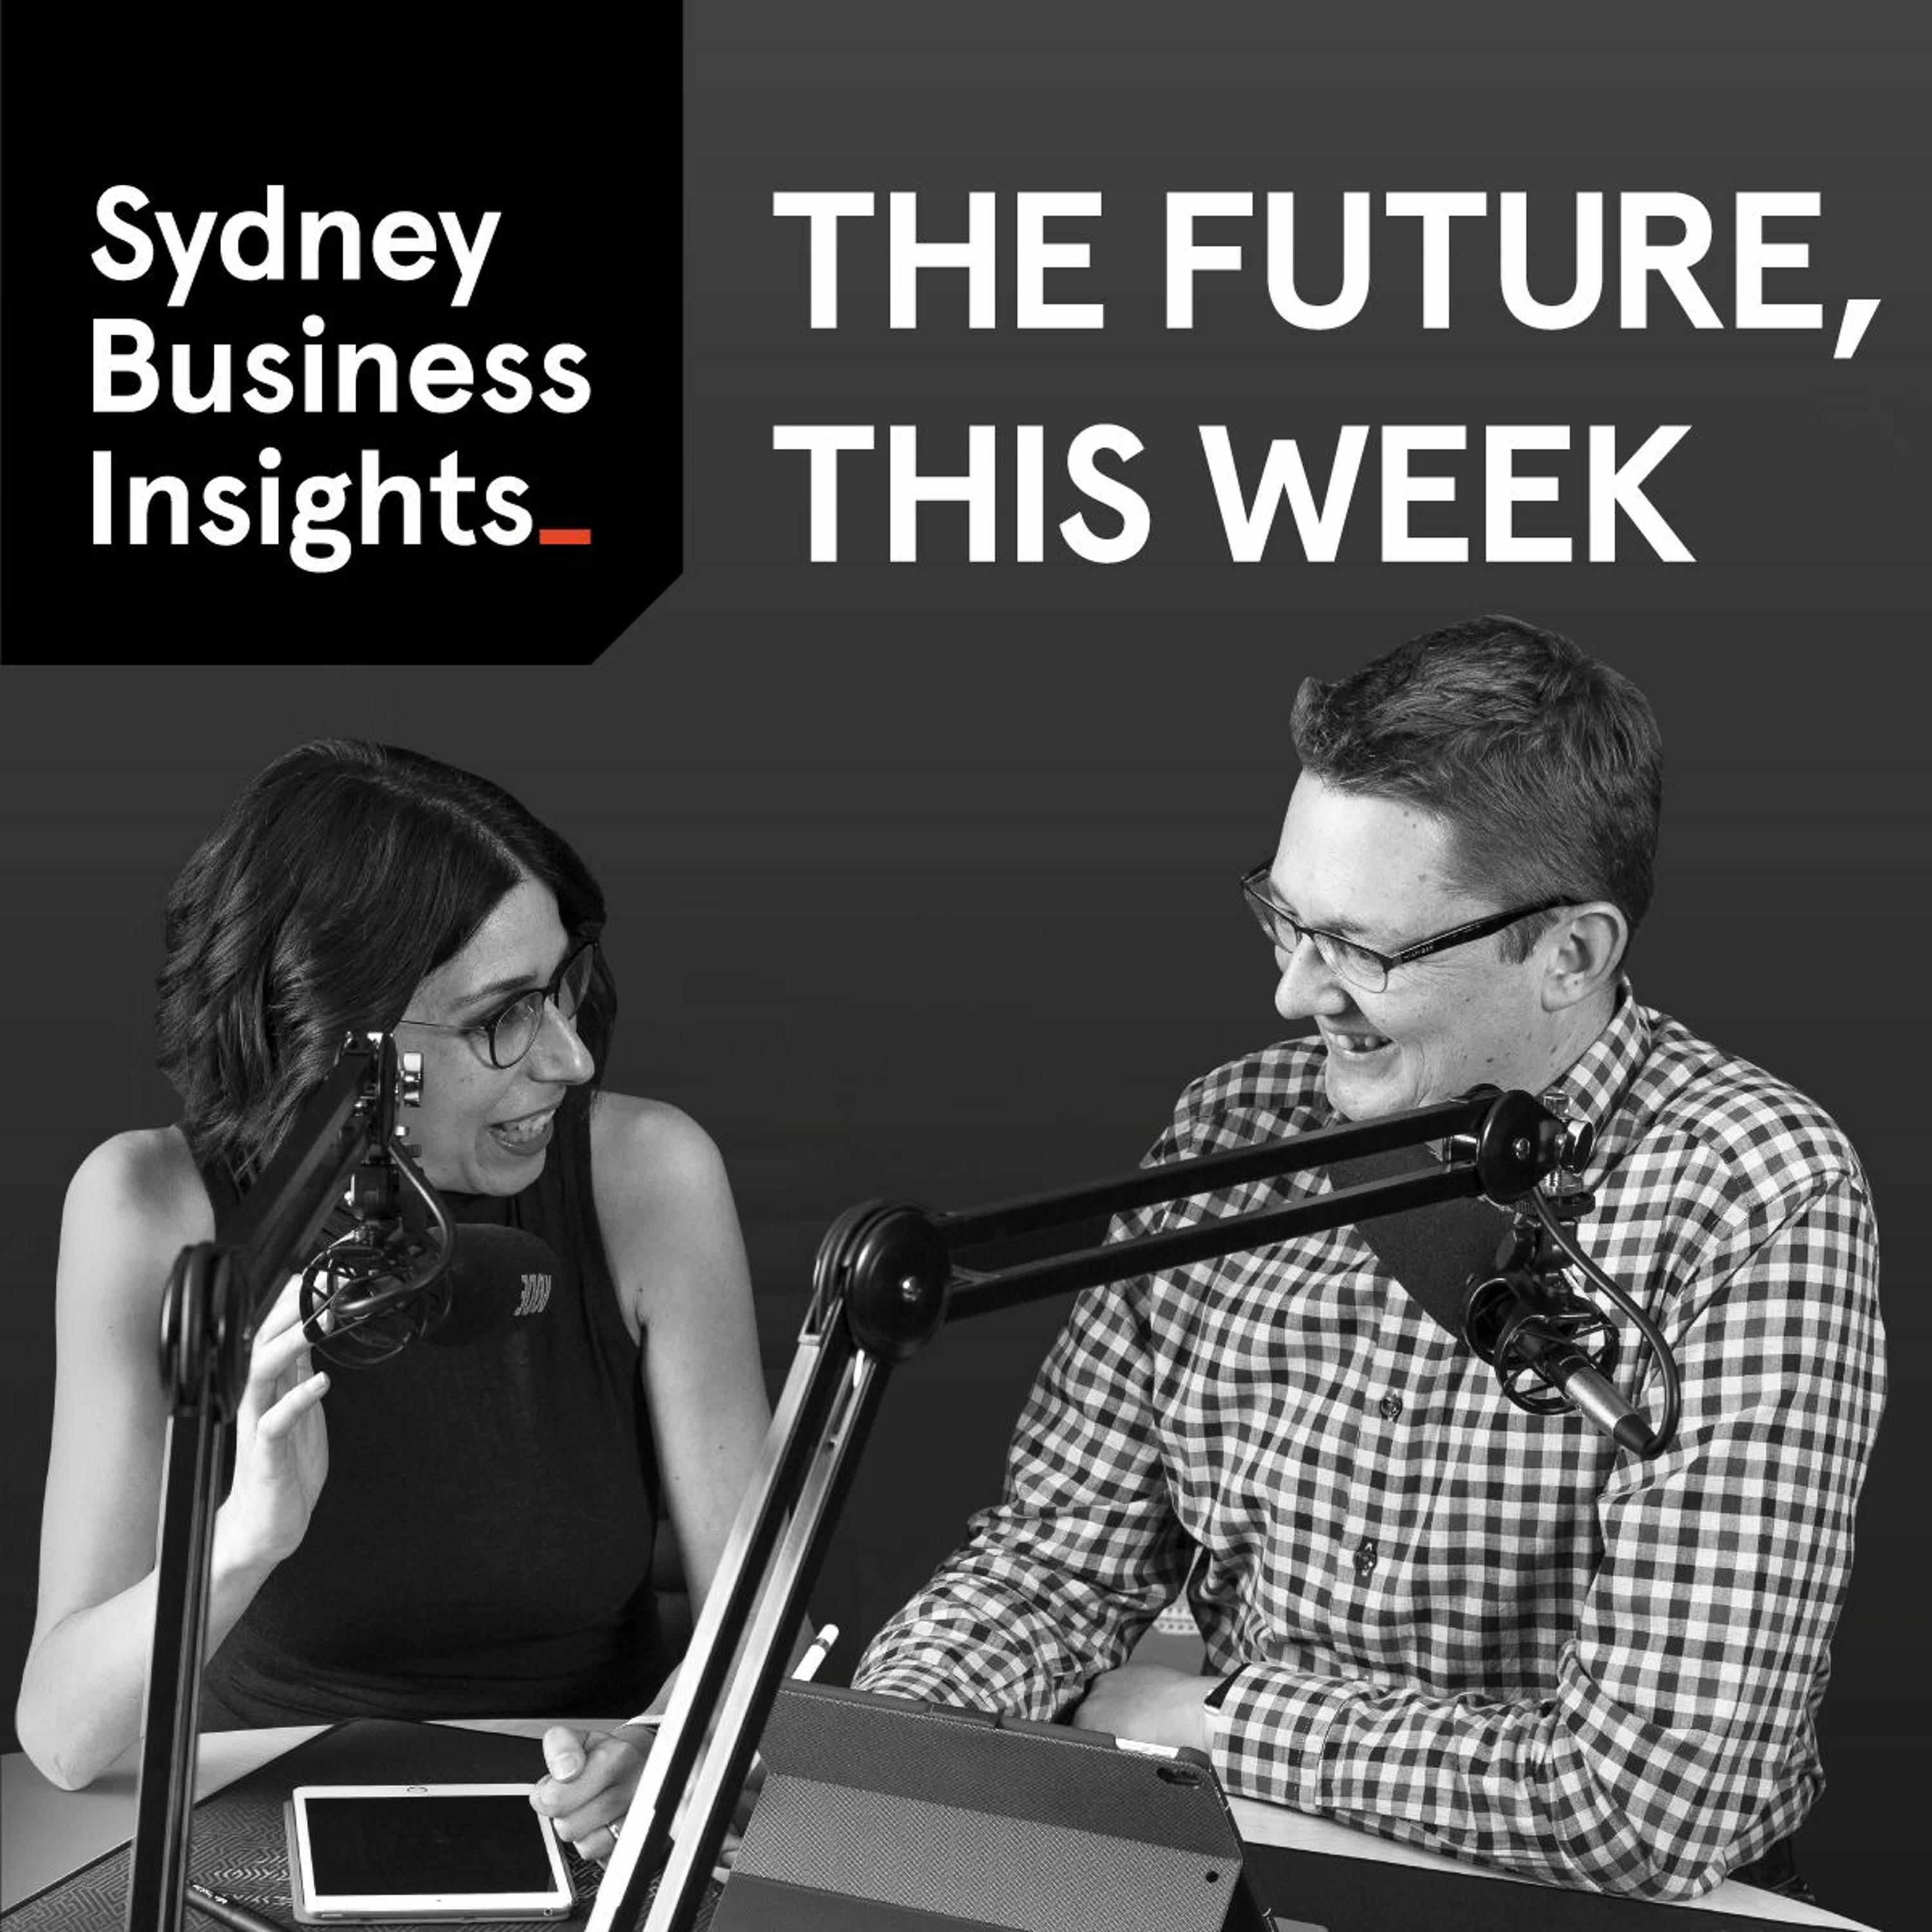 The Future, This Week 16 Feb 2018